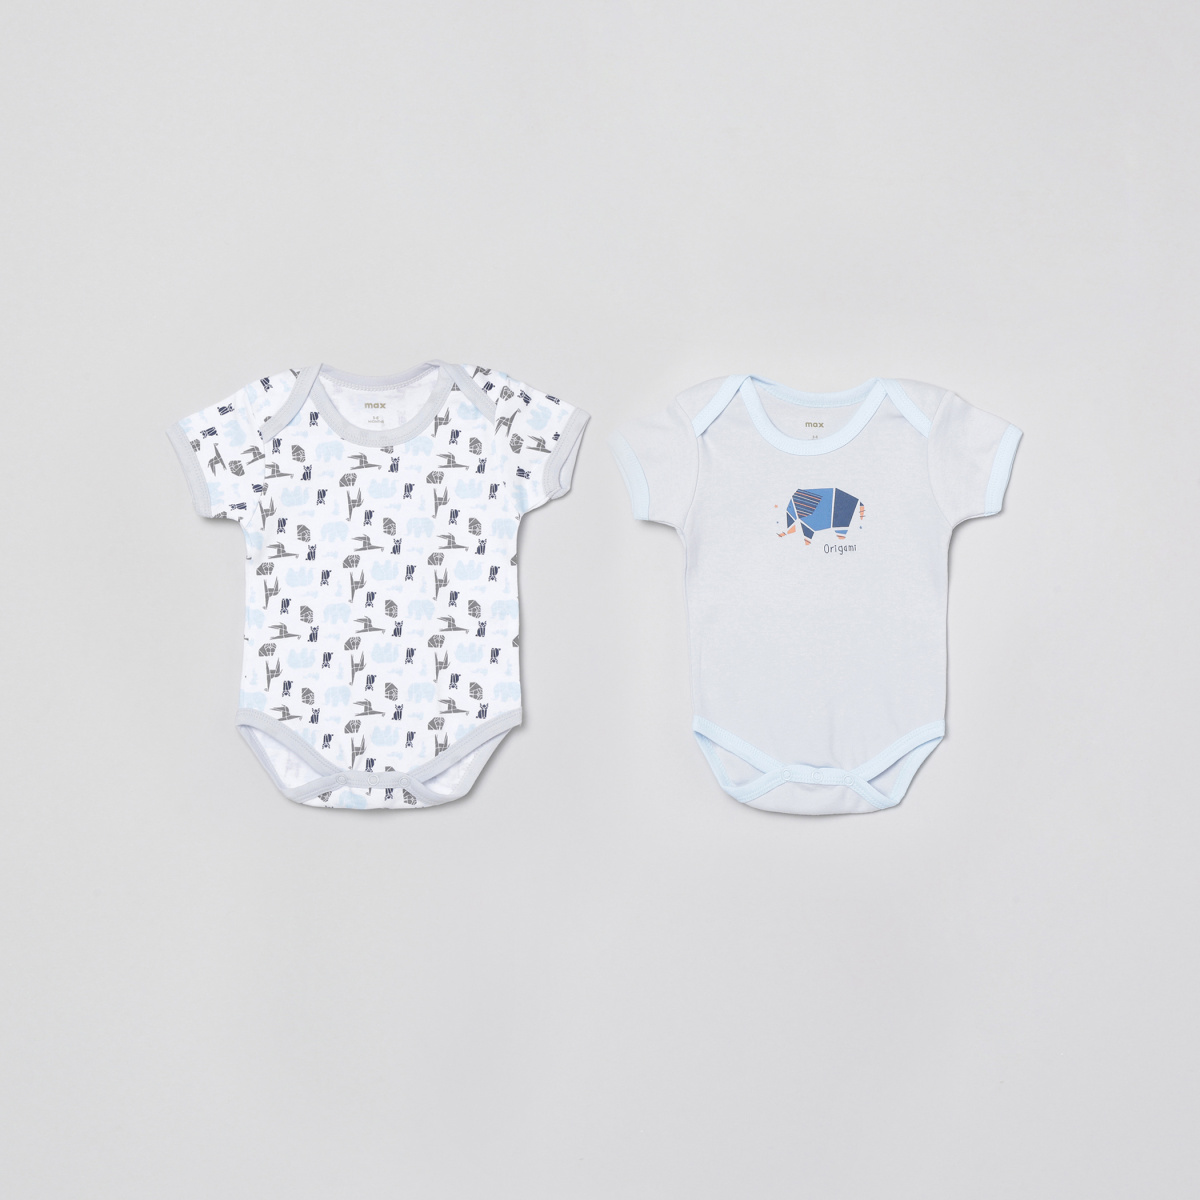 MAX Printed Knitted Bodysuit - Set of 2